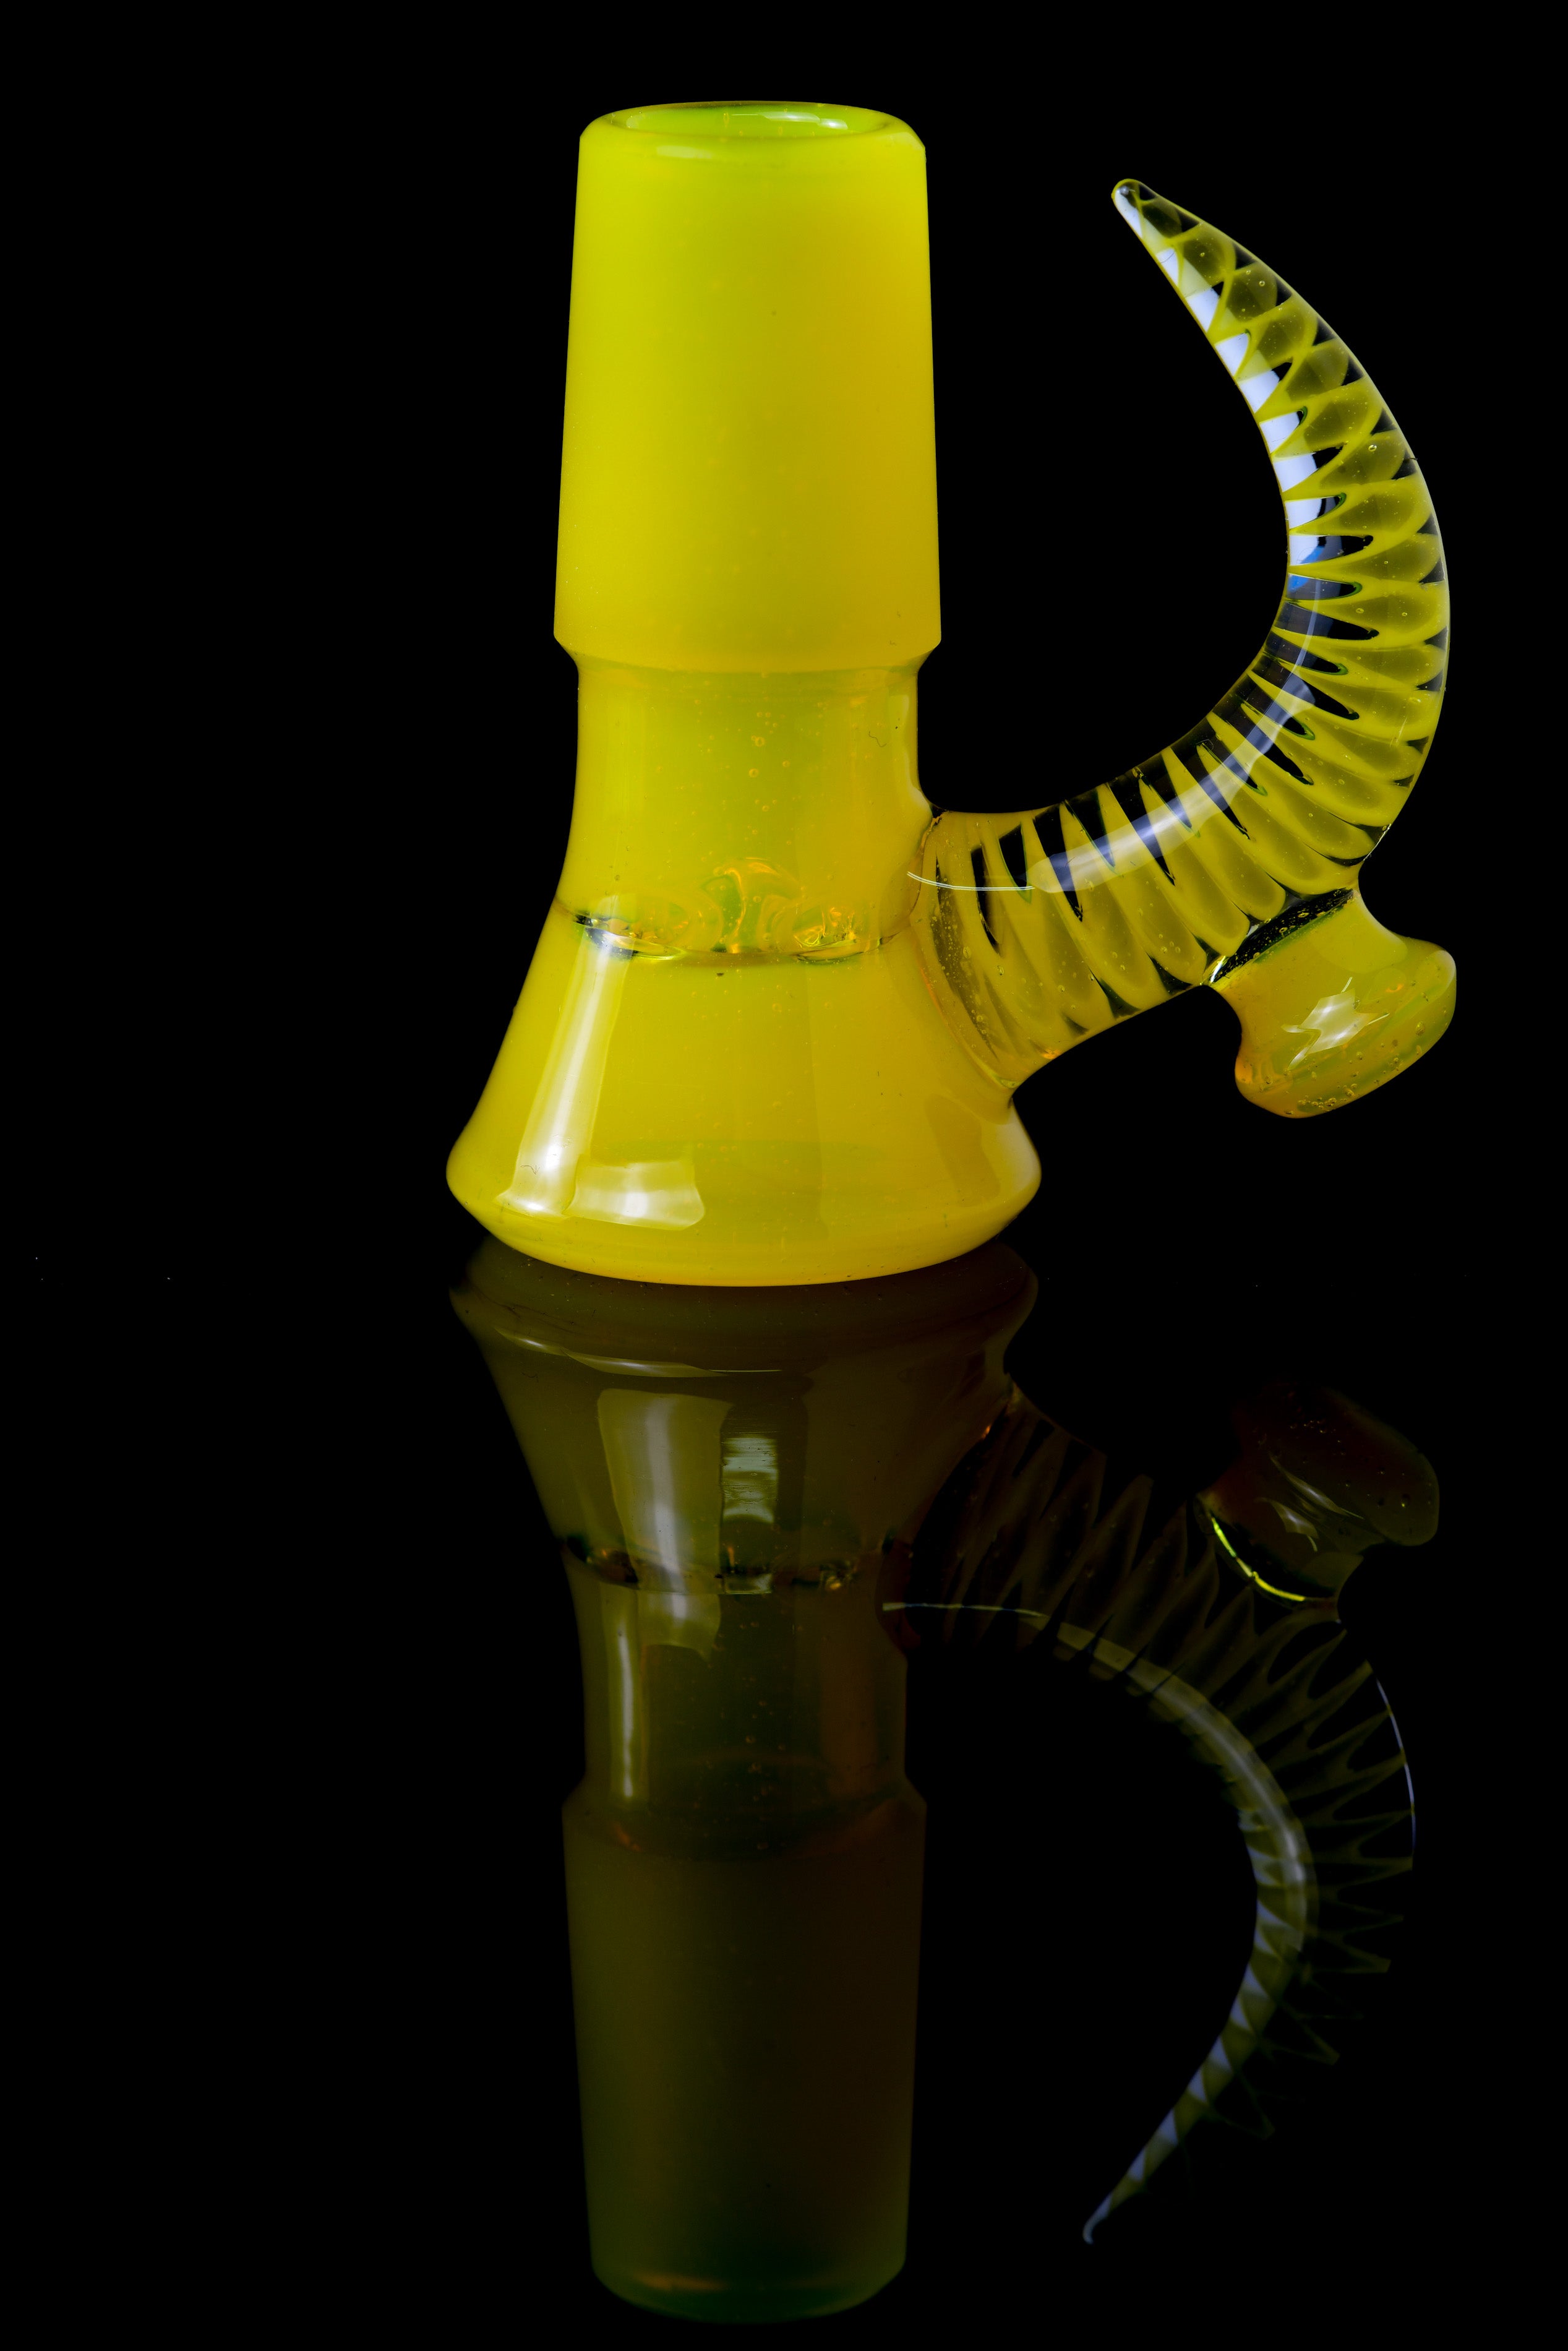 Jamms Glass - 18mm 4 Hole Fully Worked Slide W/ Cane Handle - Lemon Slyme